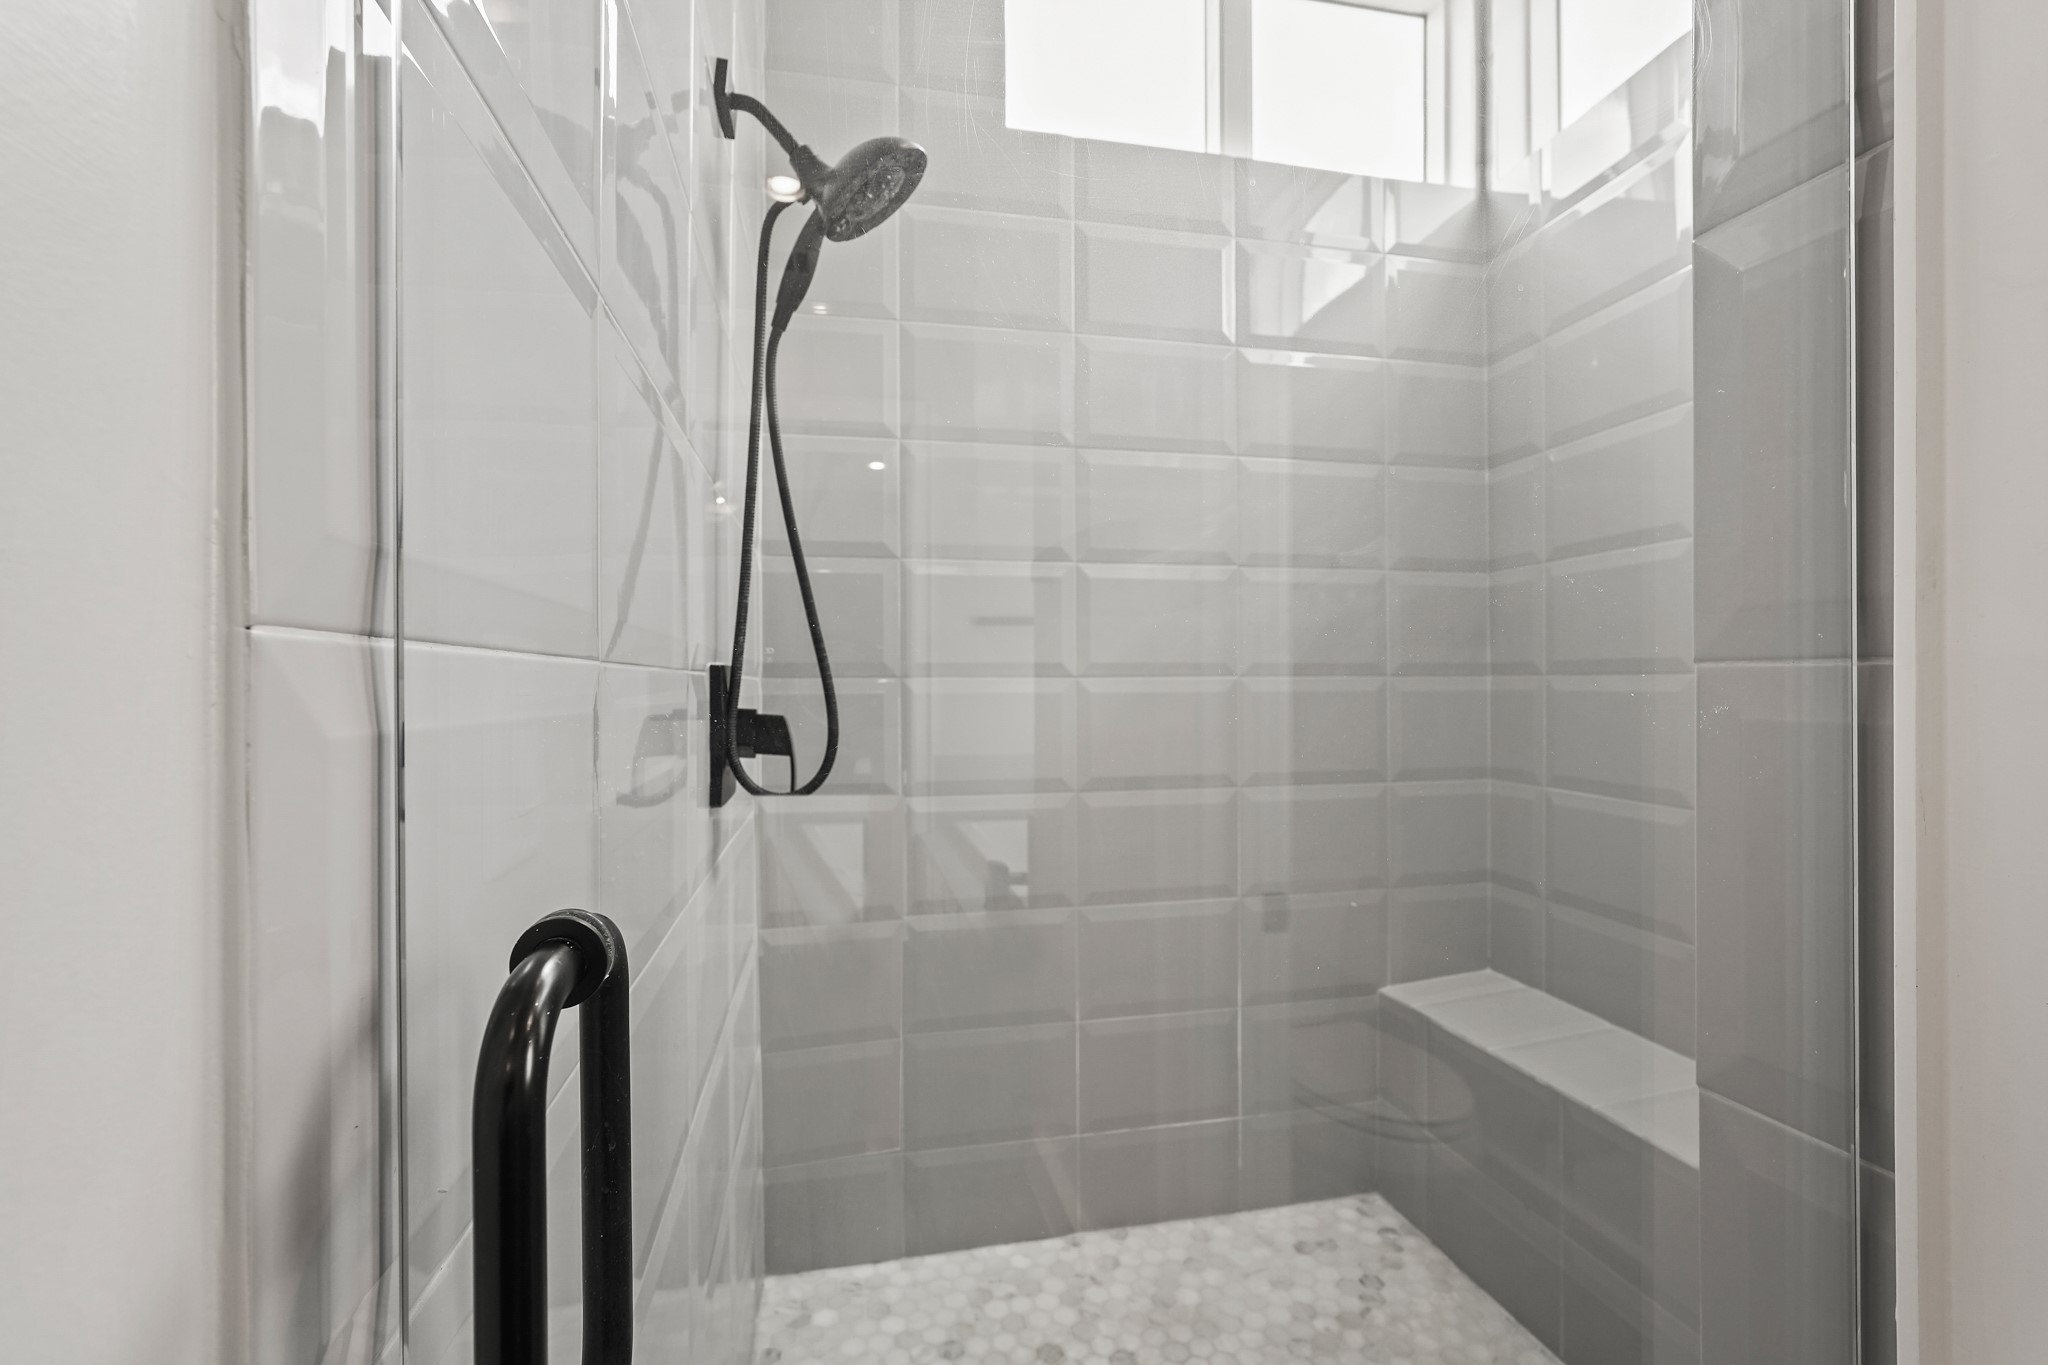 Your Large, Frameless Walk-in Shower Provides Bench Seating for Enhanced Relaxation.